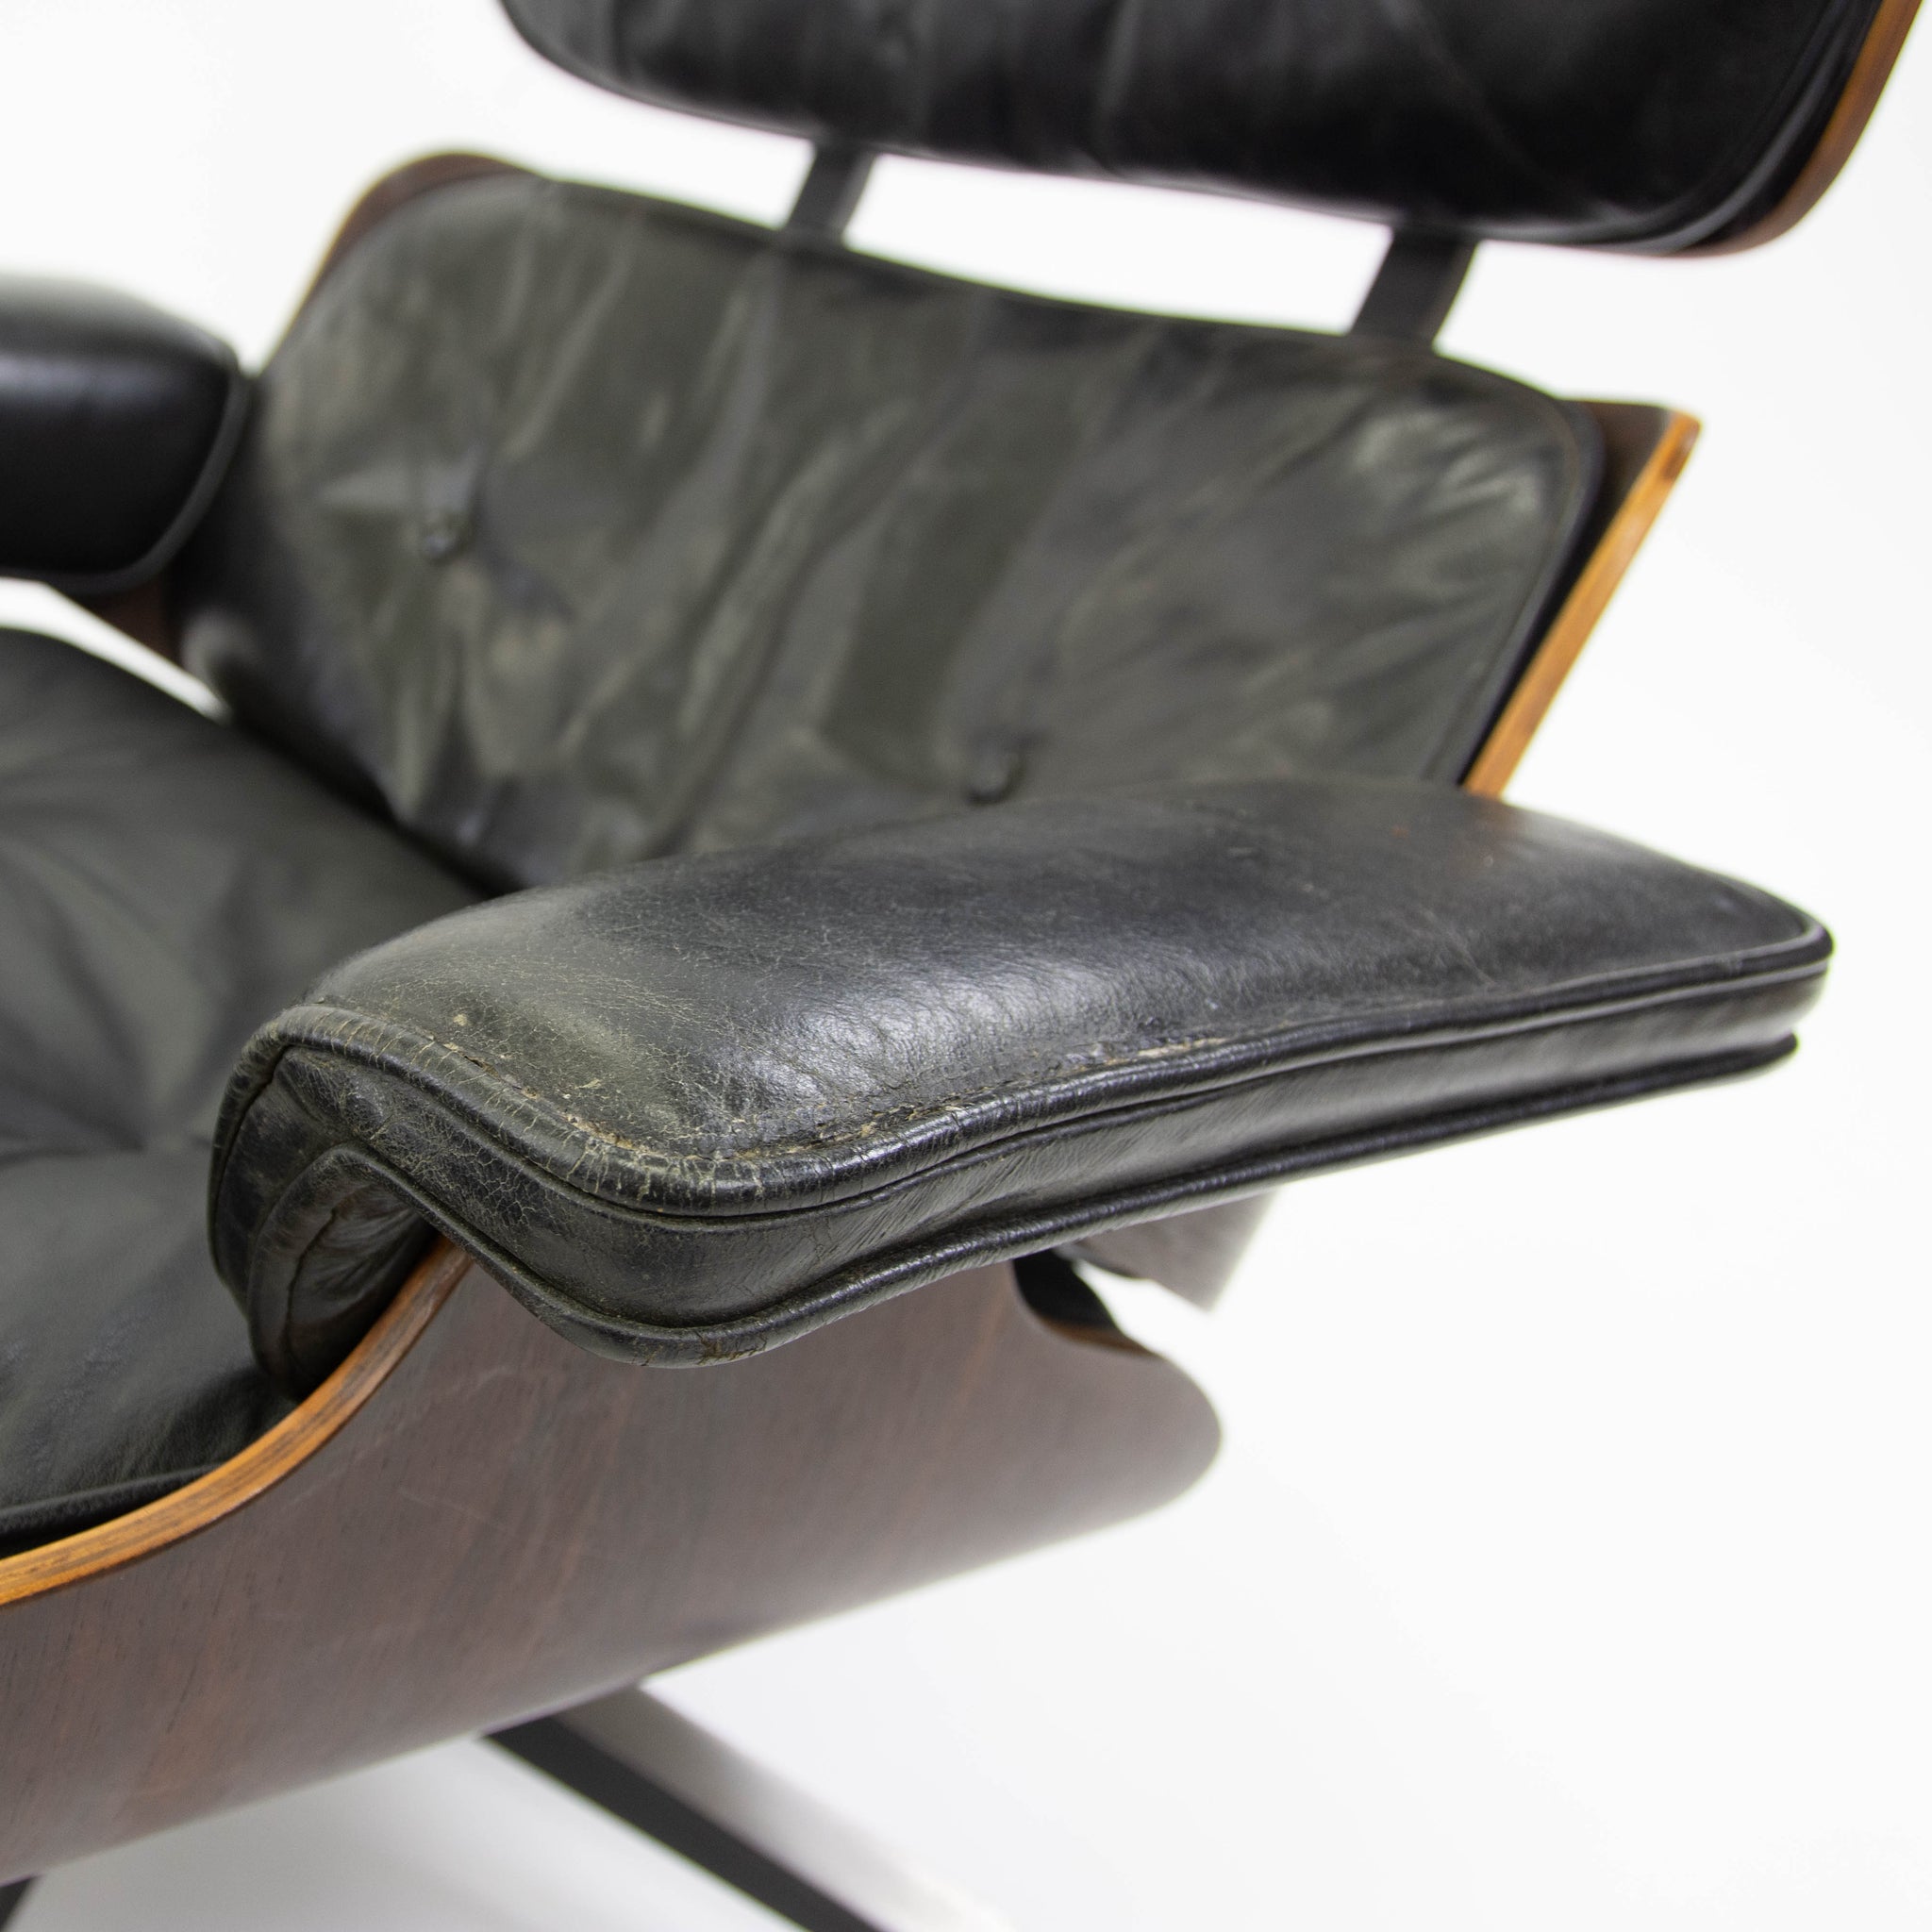 SOLD 1950's Herman Miller Eames Lounge Chair & Ottoman Rosewood 670 671 Black Leather